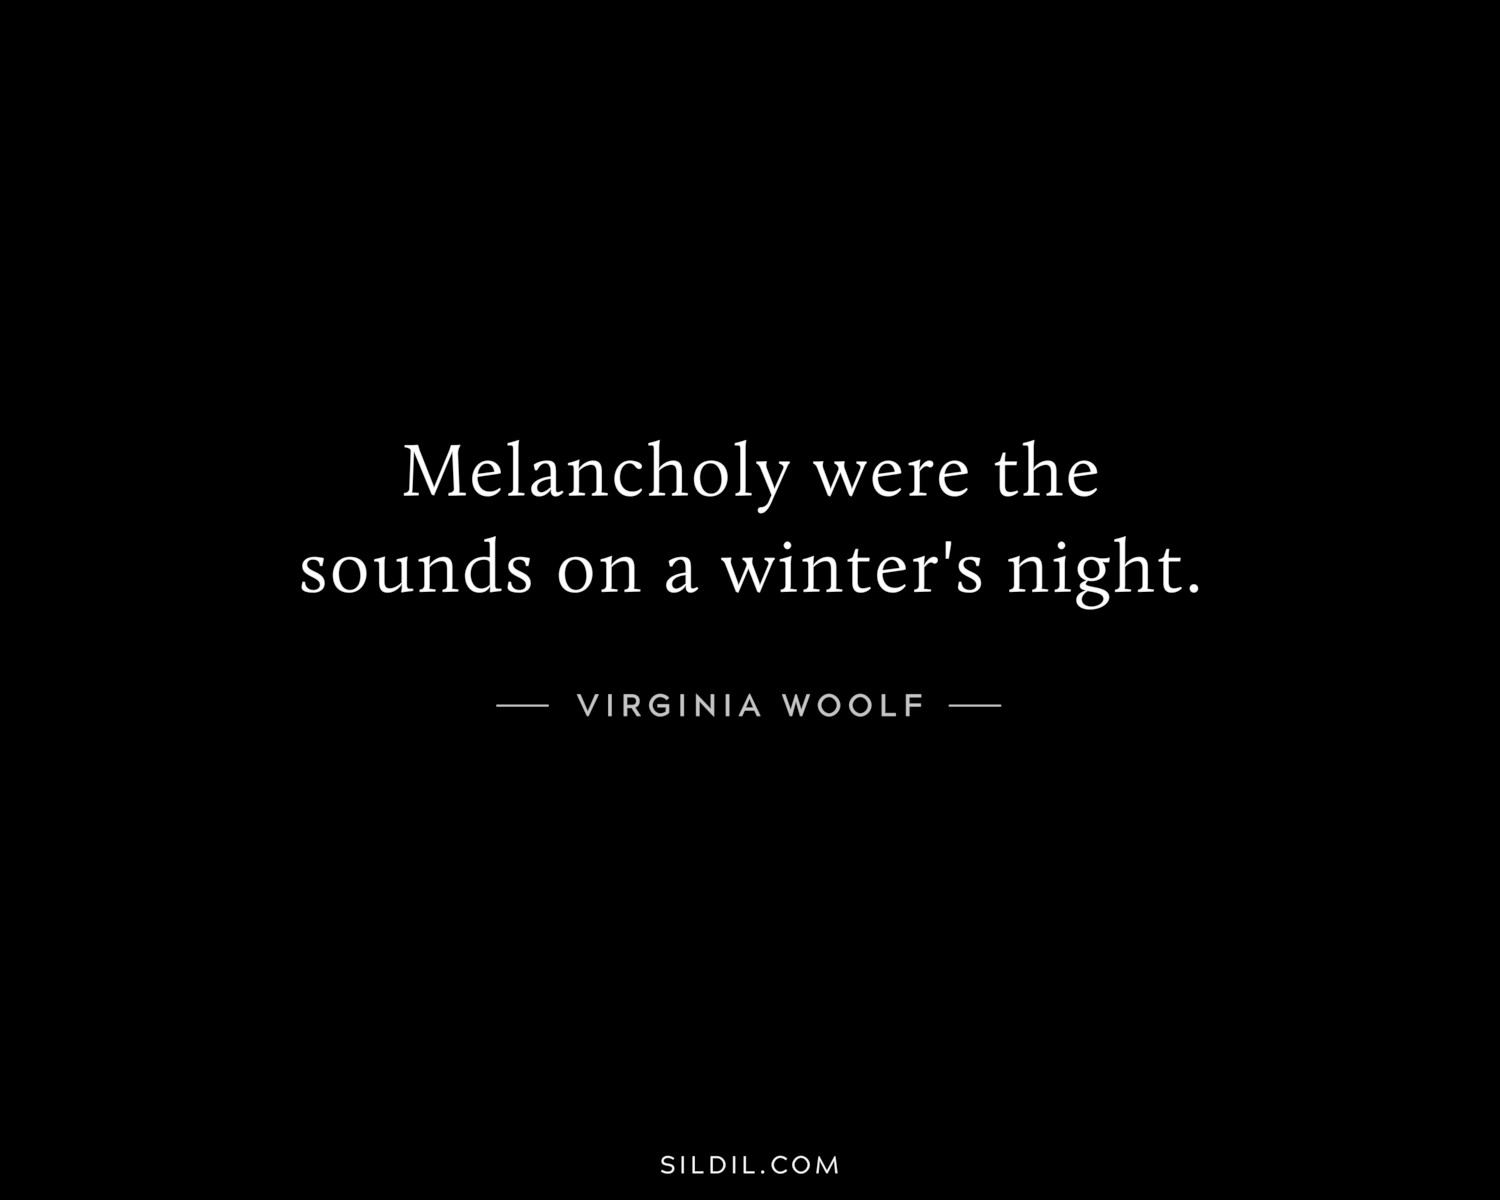 Melancholy were the sounds on a winter's night.